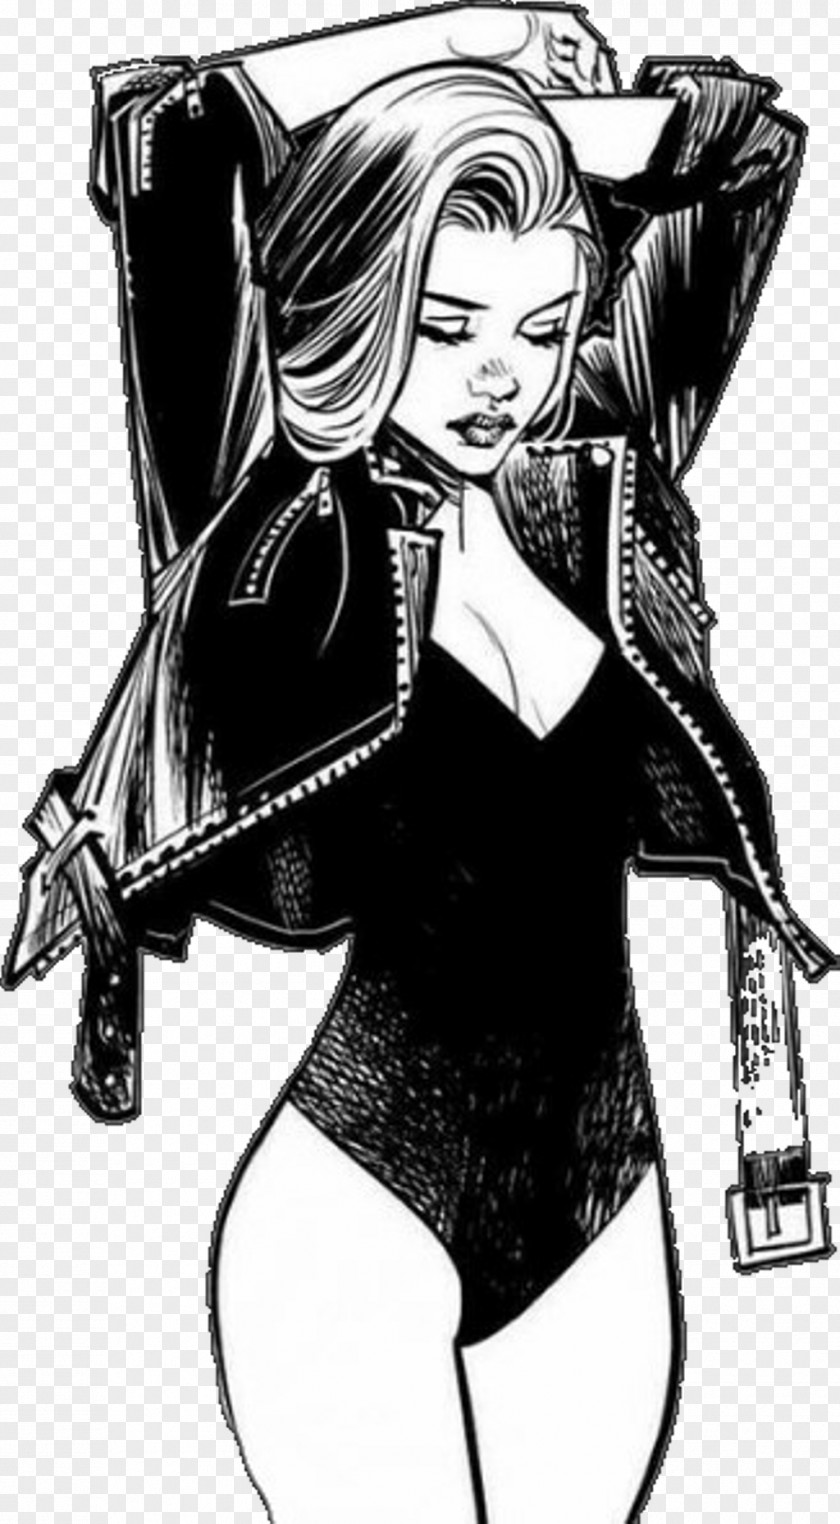 Painting Black Canary Drawing Comics Sketch Illustration PNG